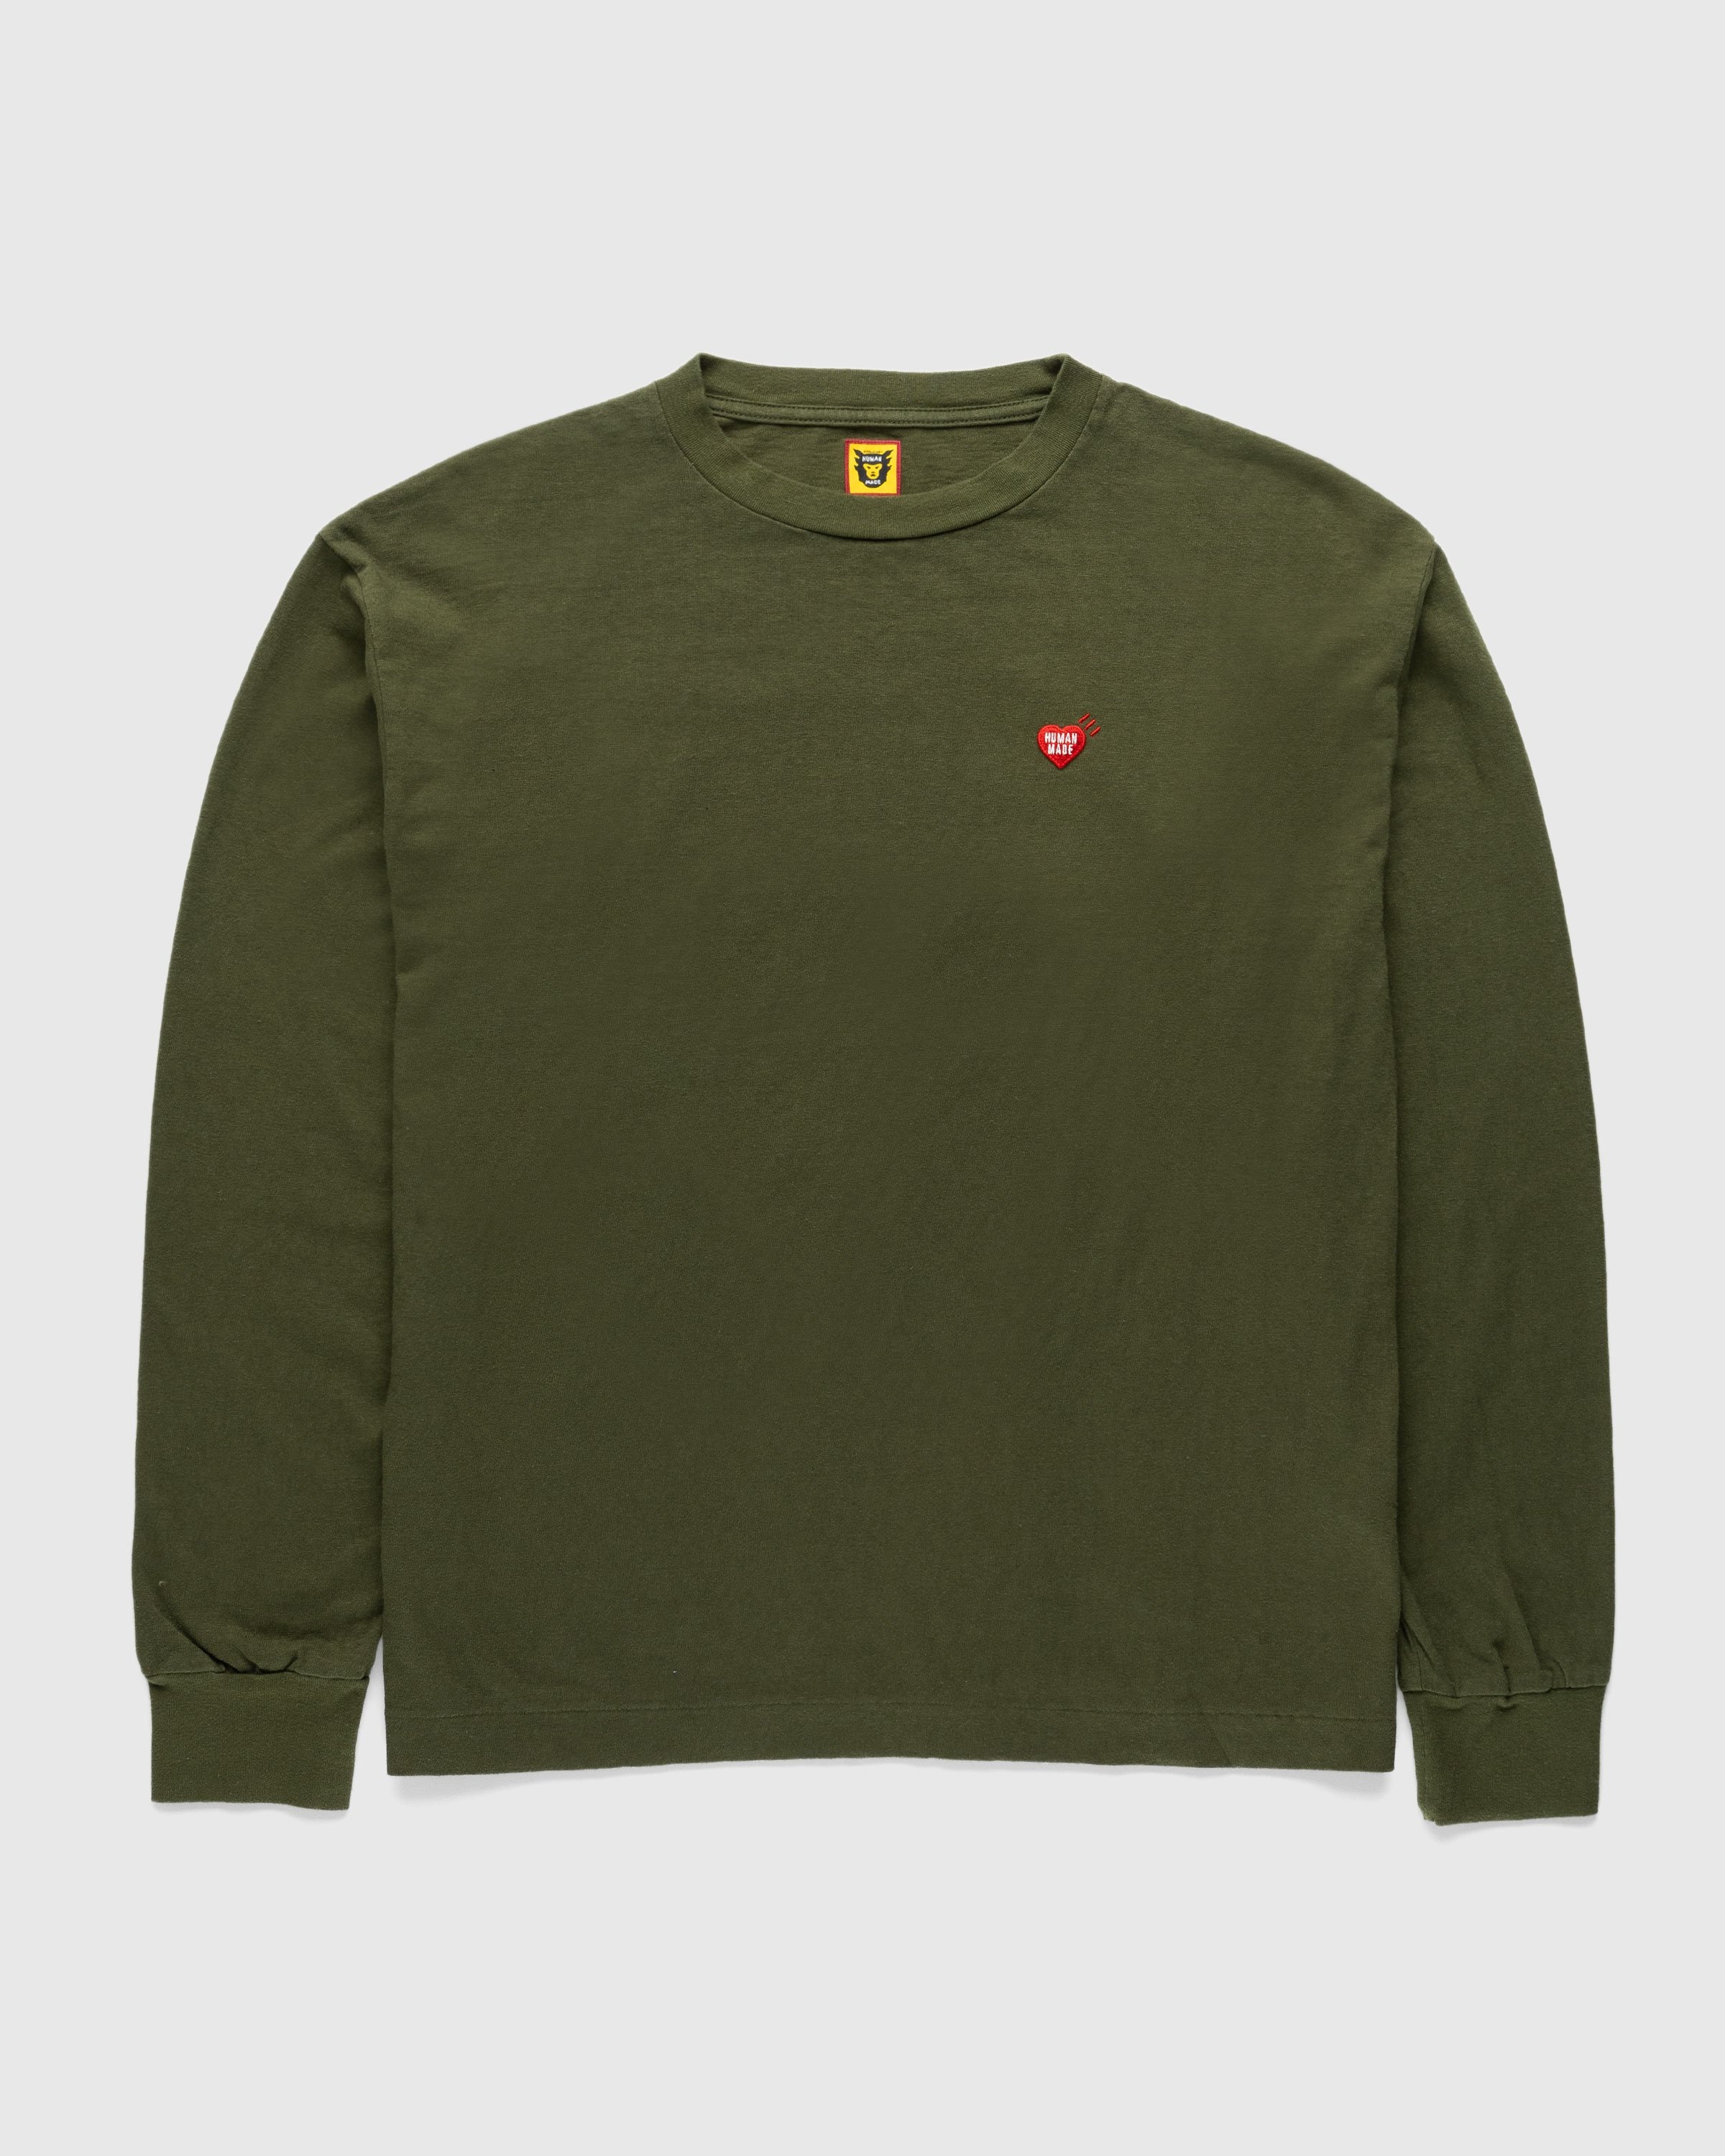 Human Made – GRAPHIC L/S T-SHIRT #1 Olive Drab | Highsnobiety Shop